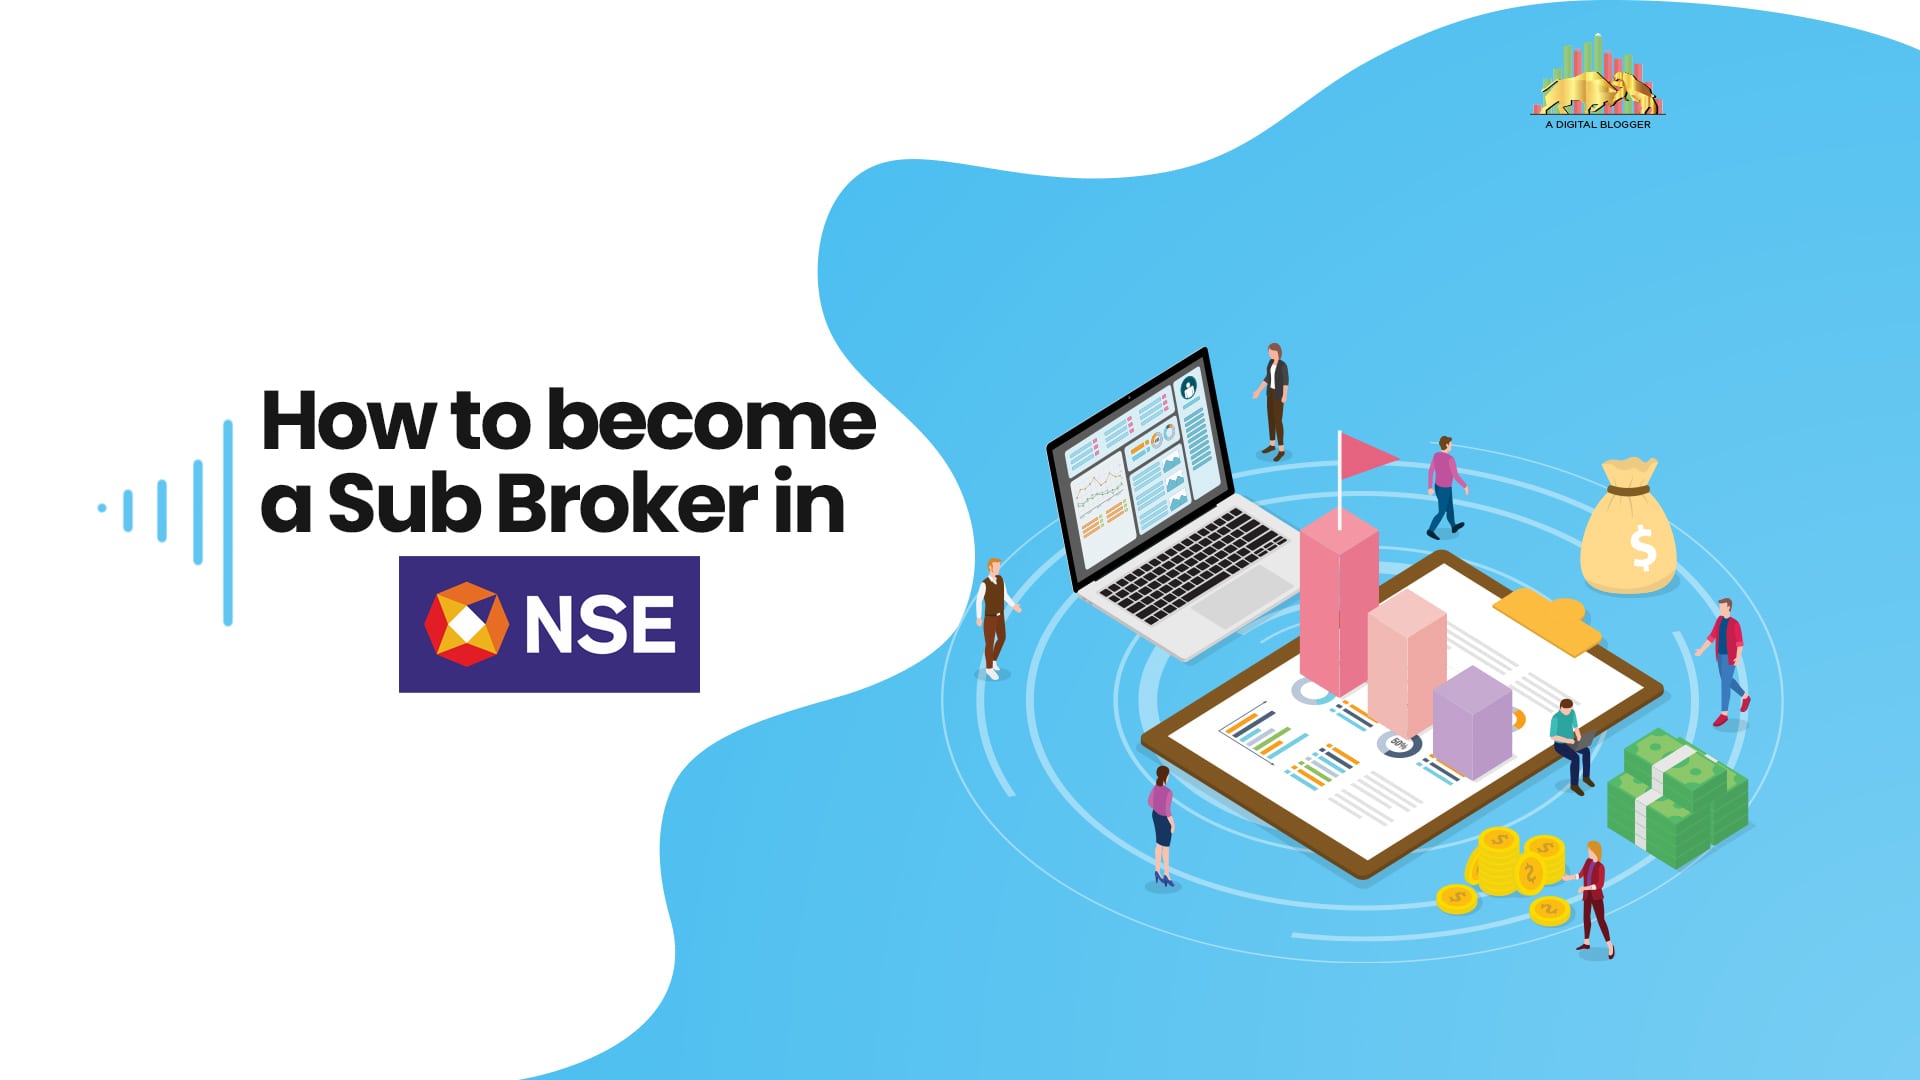 Become sub broker in NSE